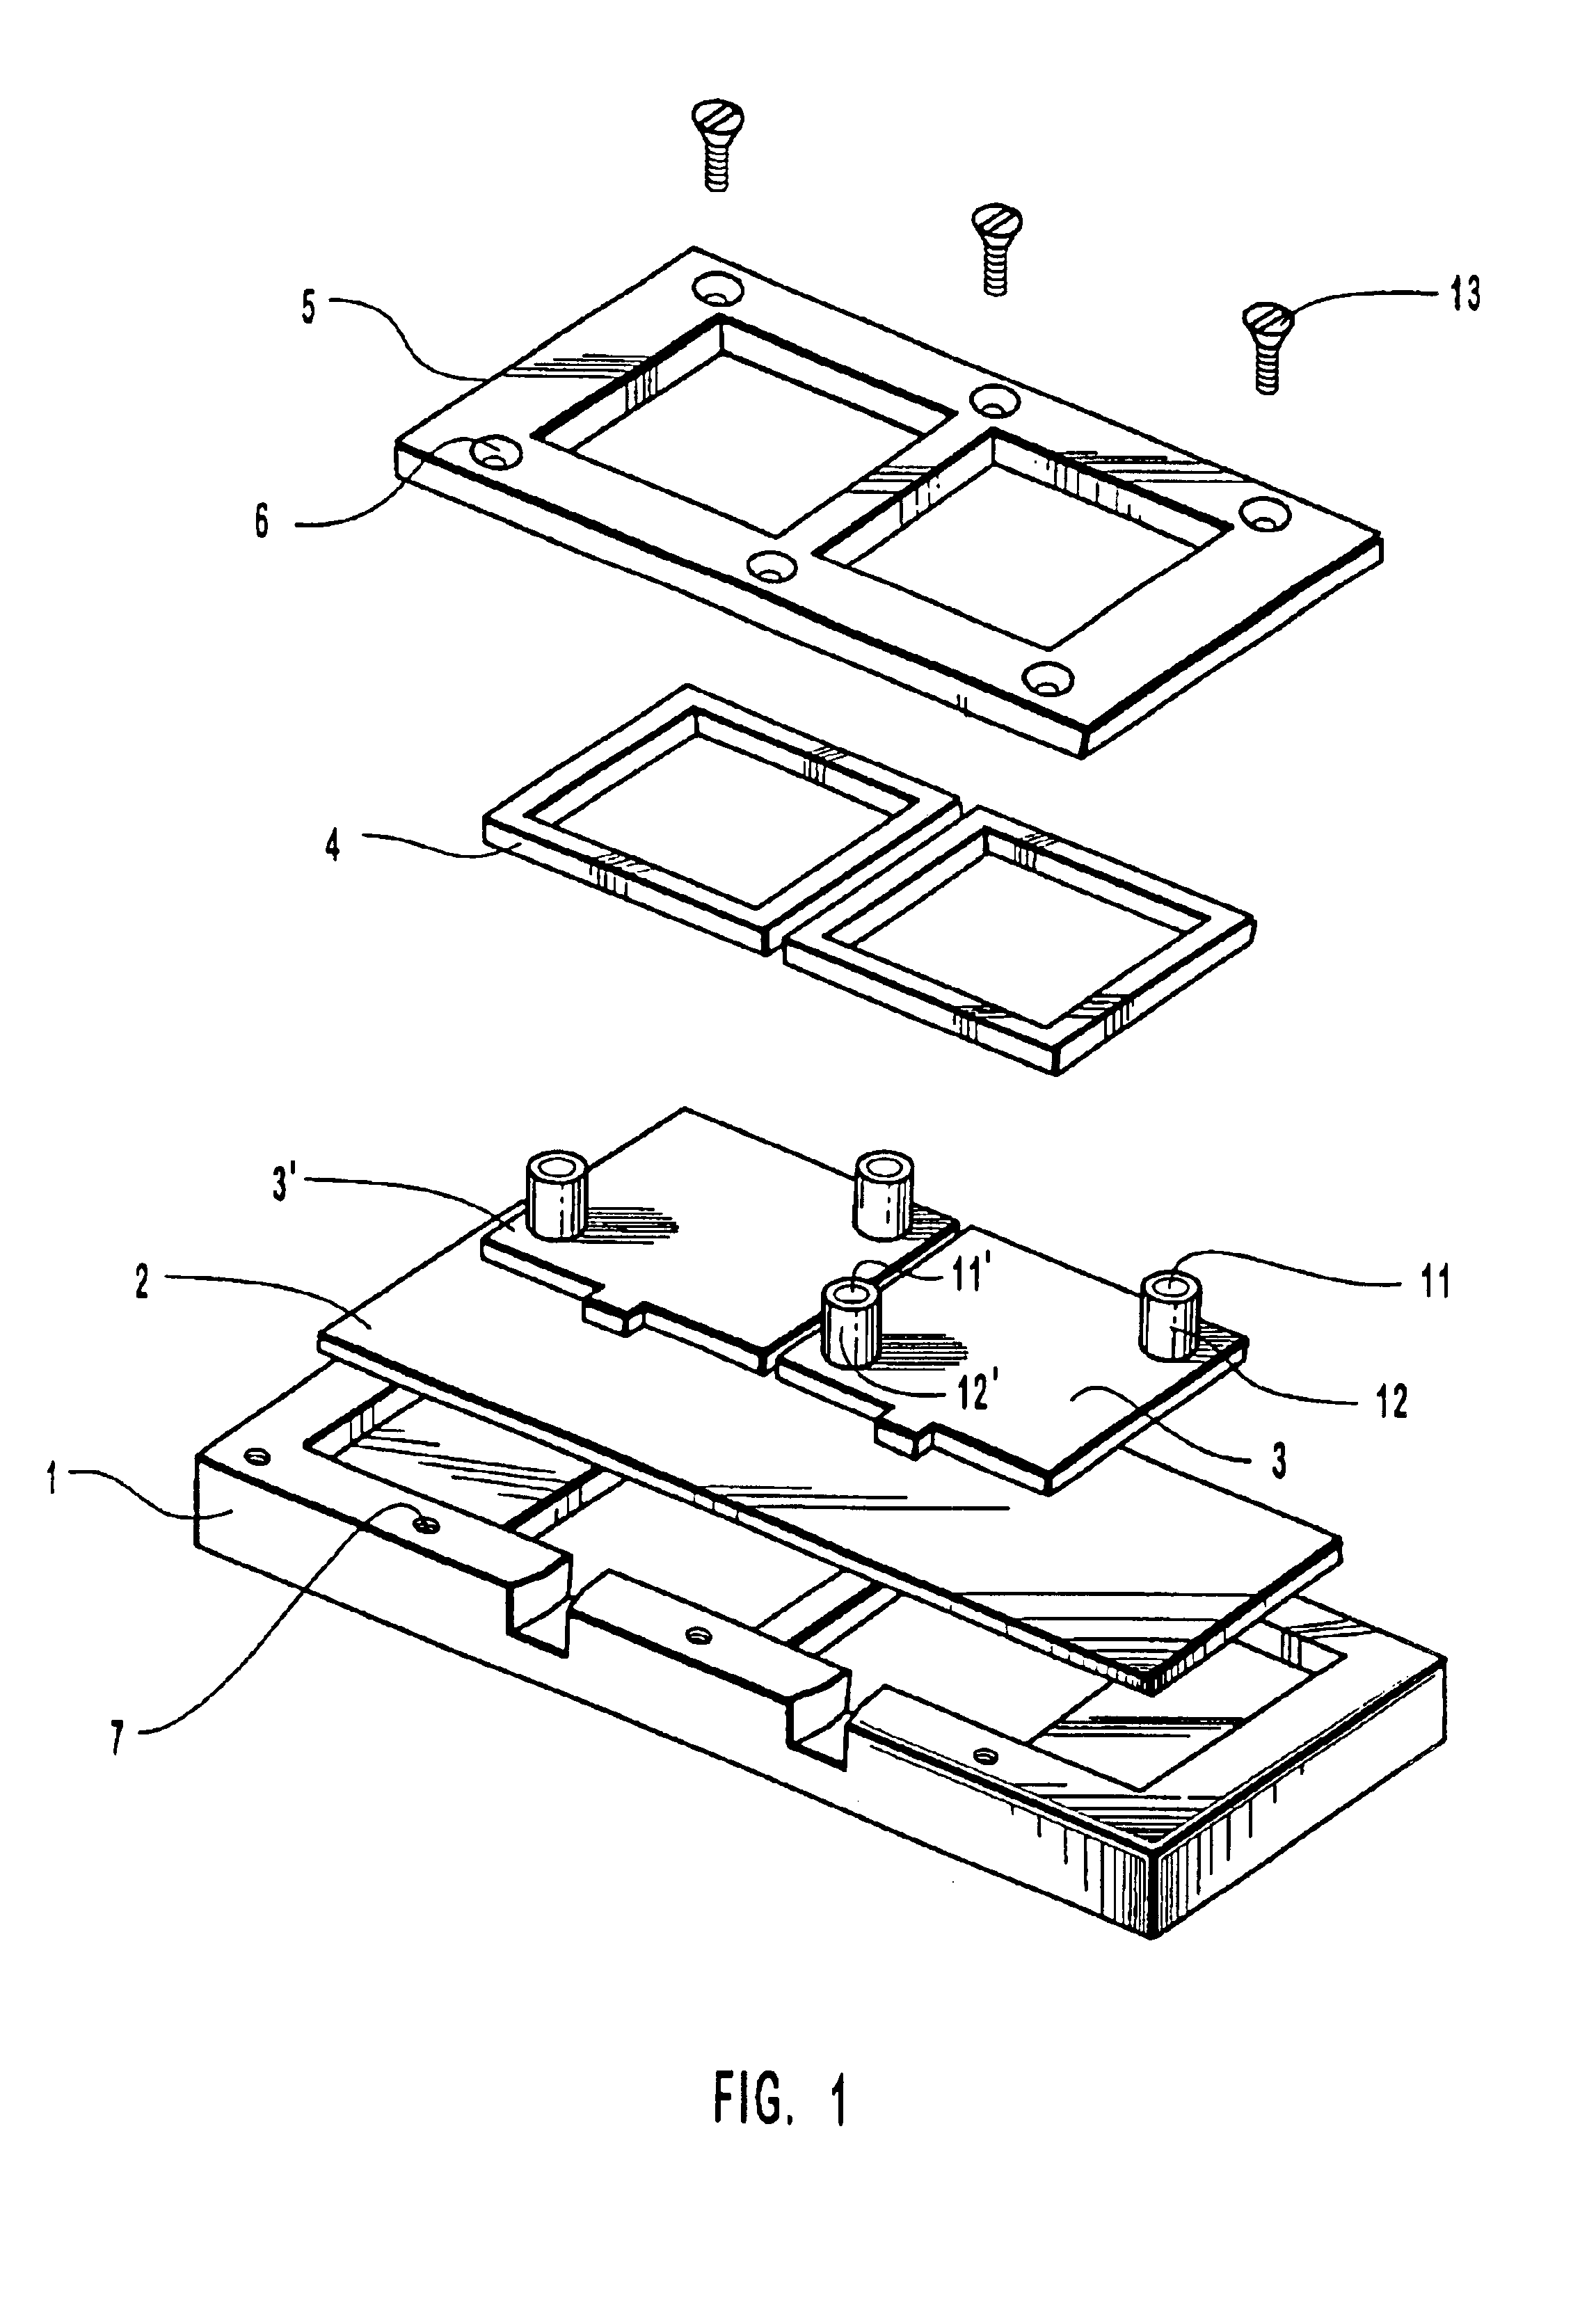 Method for conducting chemical or biochemical reactions on a solid surface within an enclosed chamber